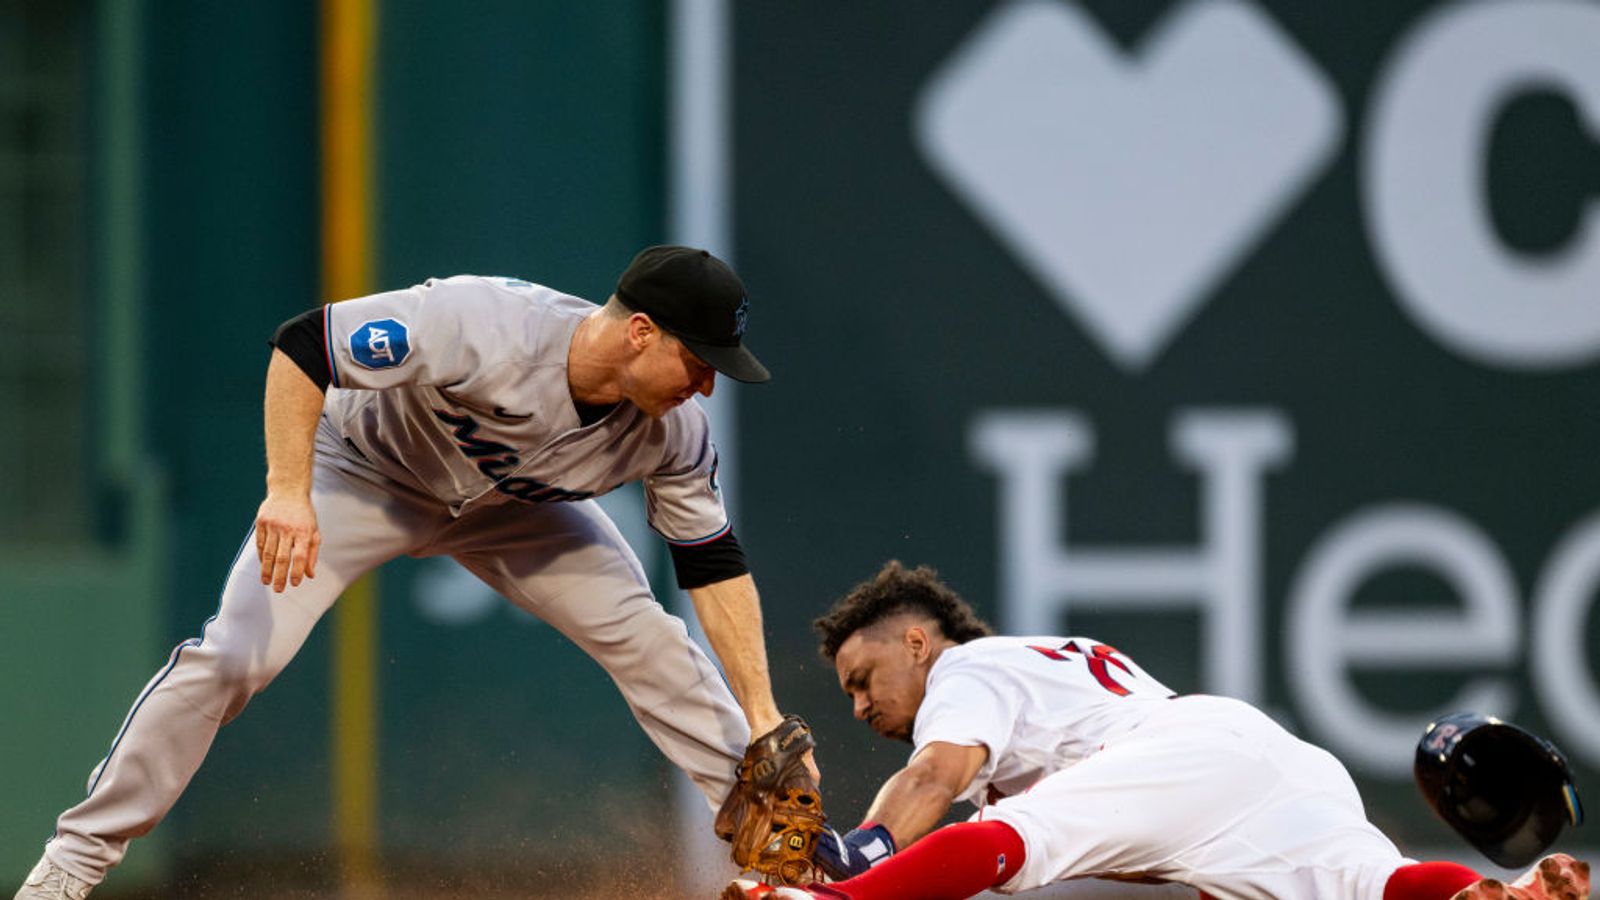 BSJ Live Coverage Marlins (46-34) at Red Sox (40-40), 710 p.m.